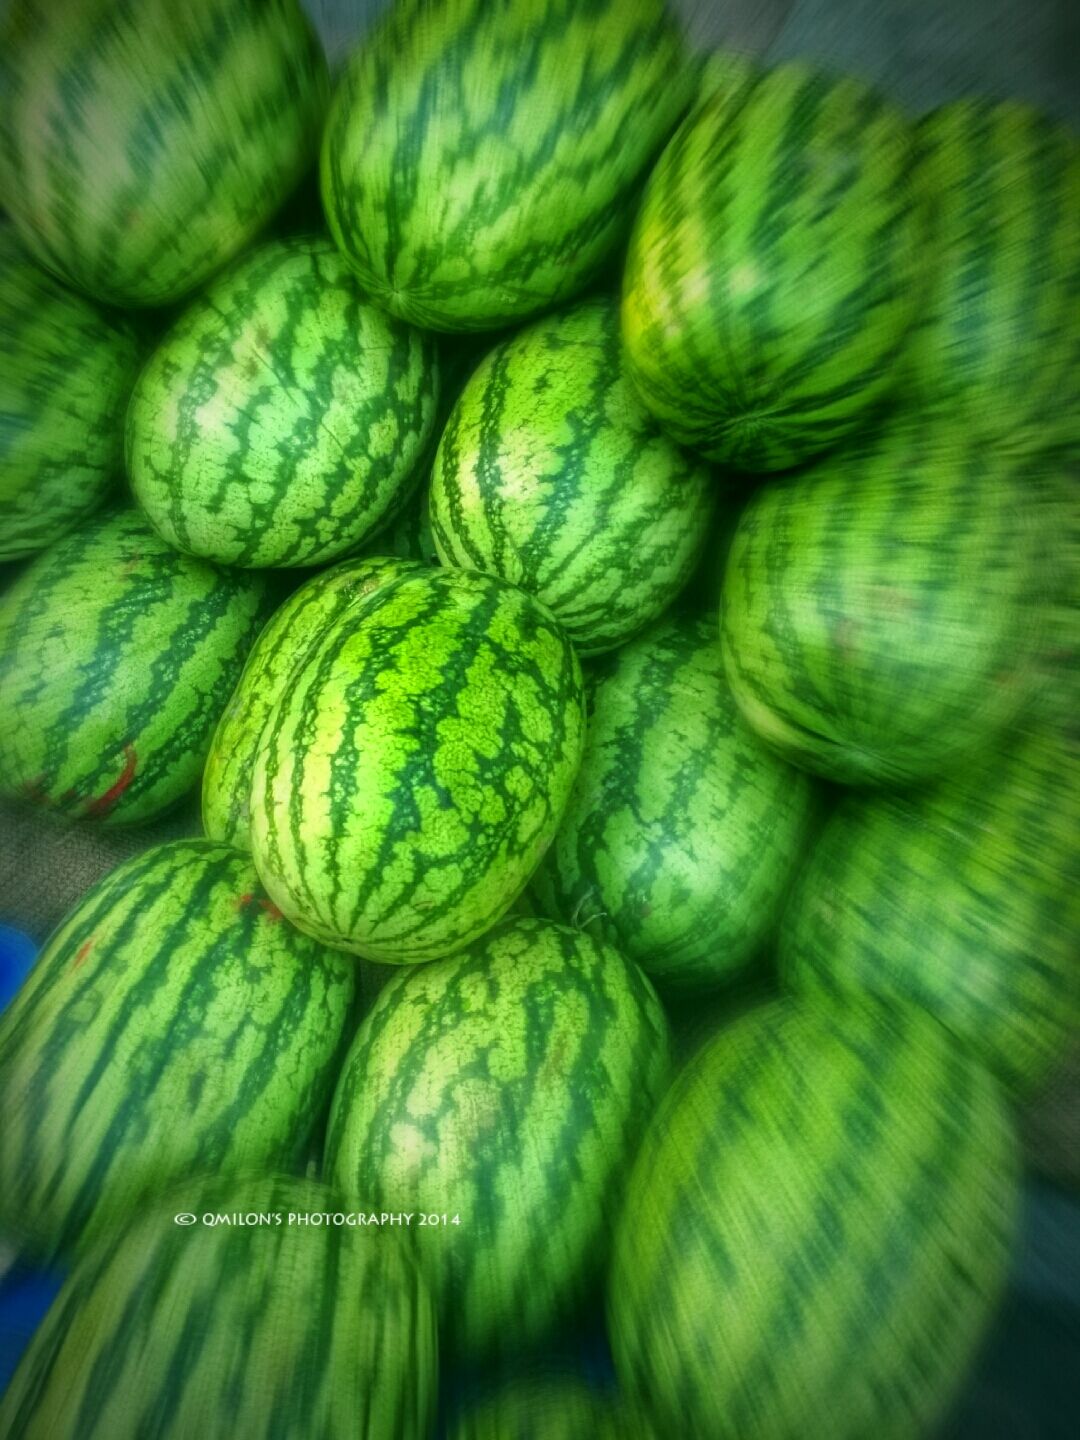 WaterMELONS